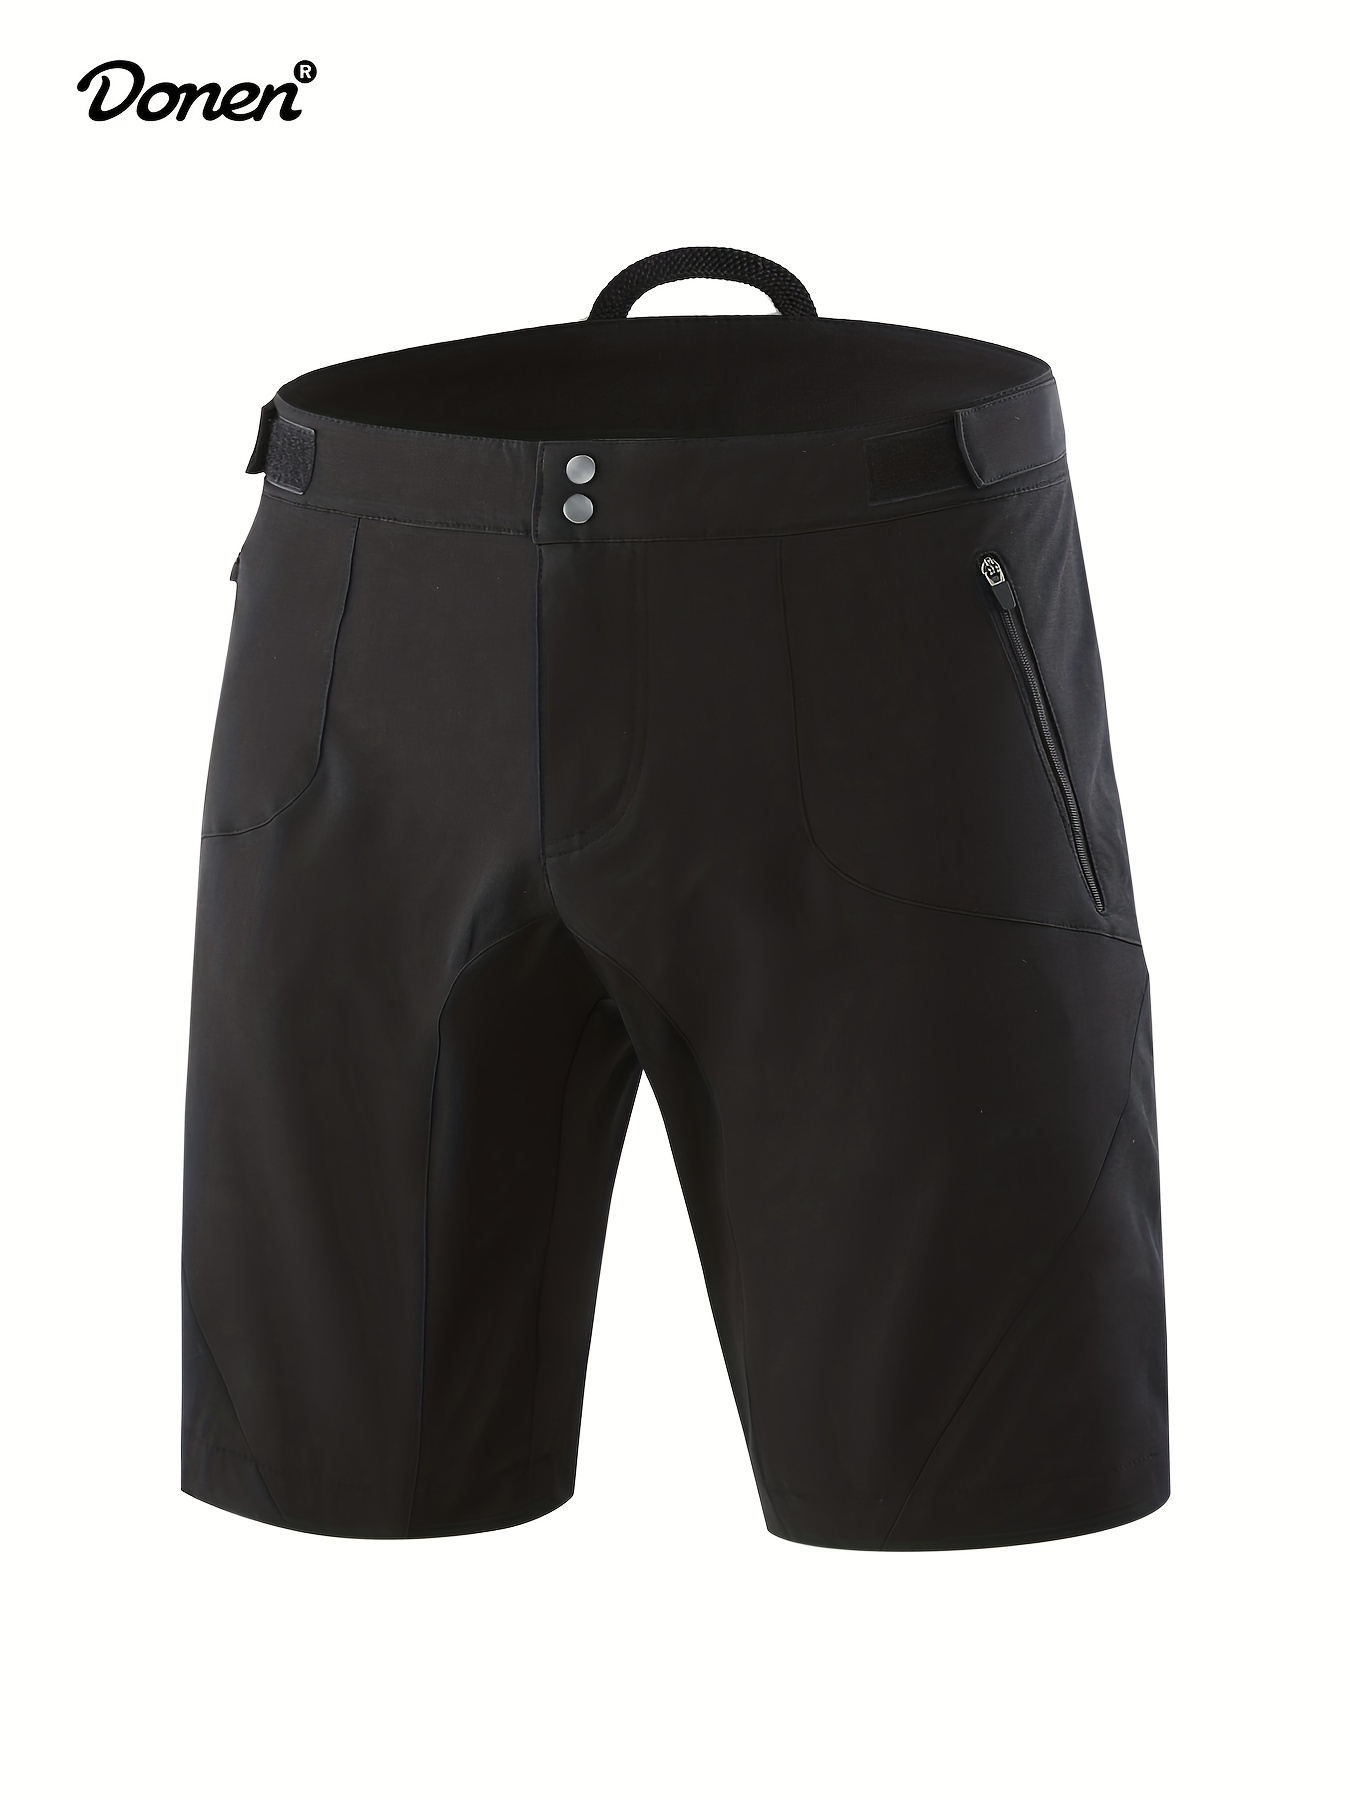 Men's Waterproof Cycling Shorts with Zipper Pocket - Perfect for Downhill  Riding & Motorbike Adventures!